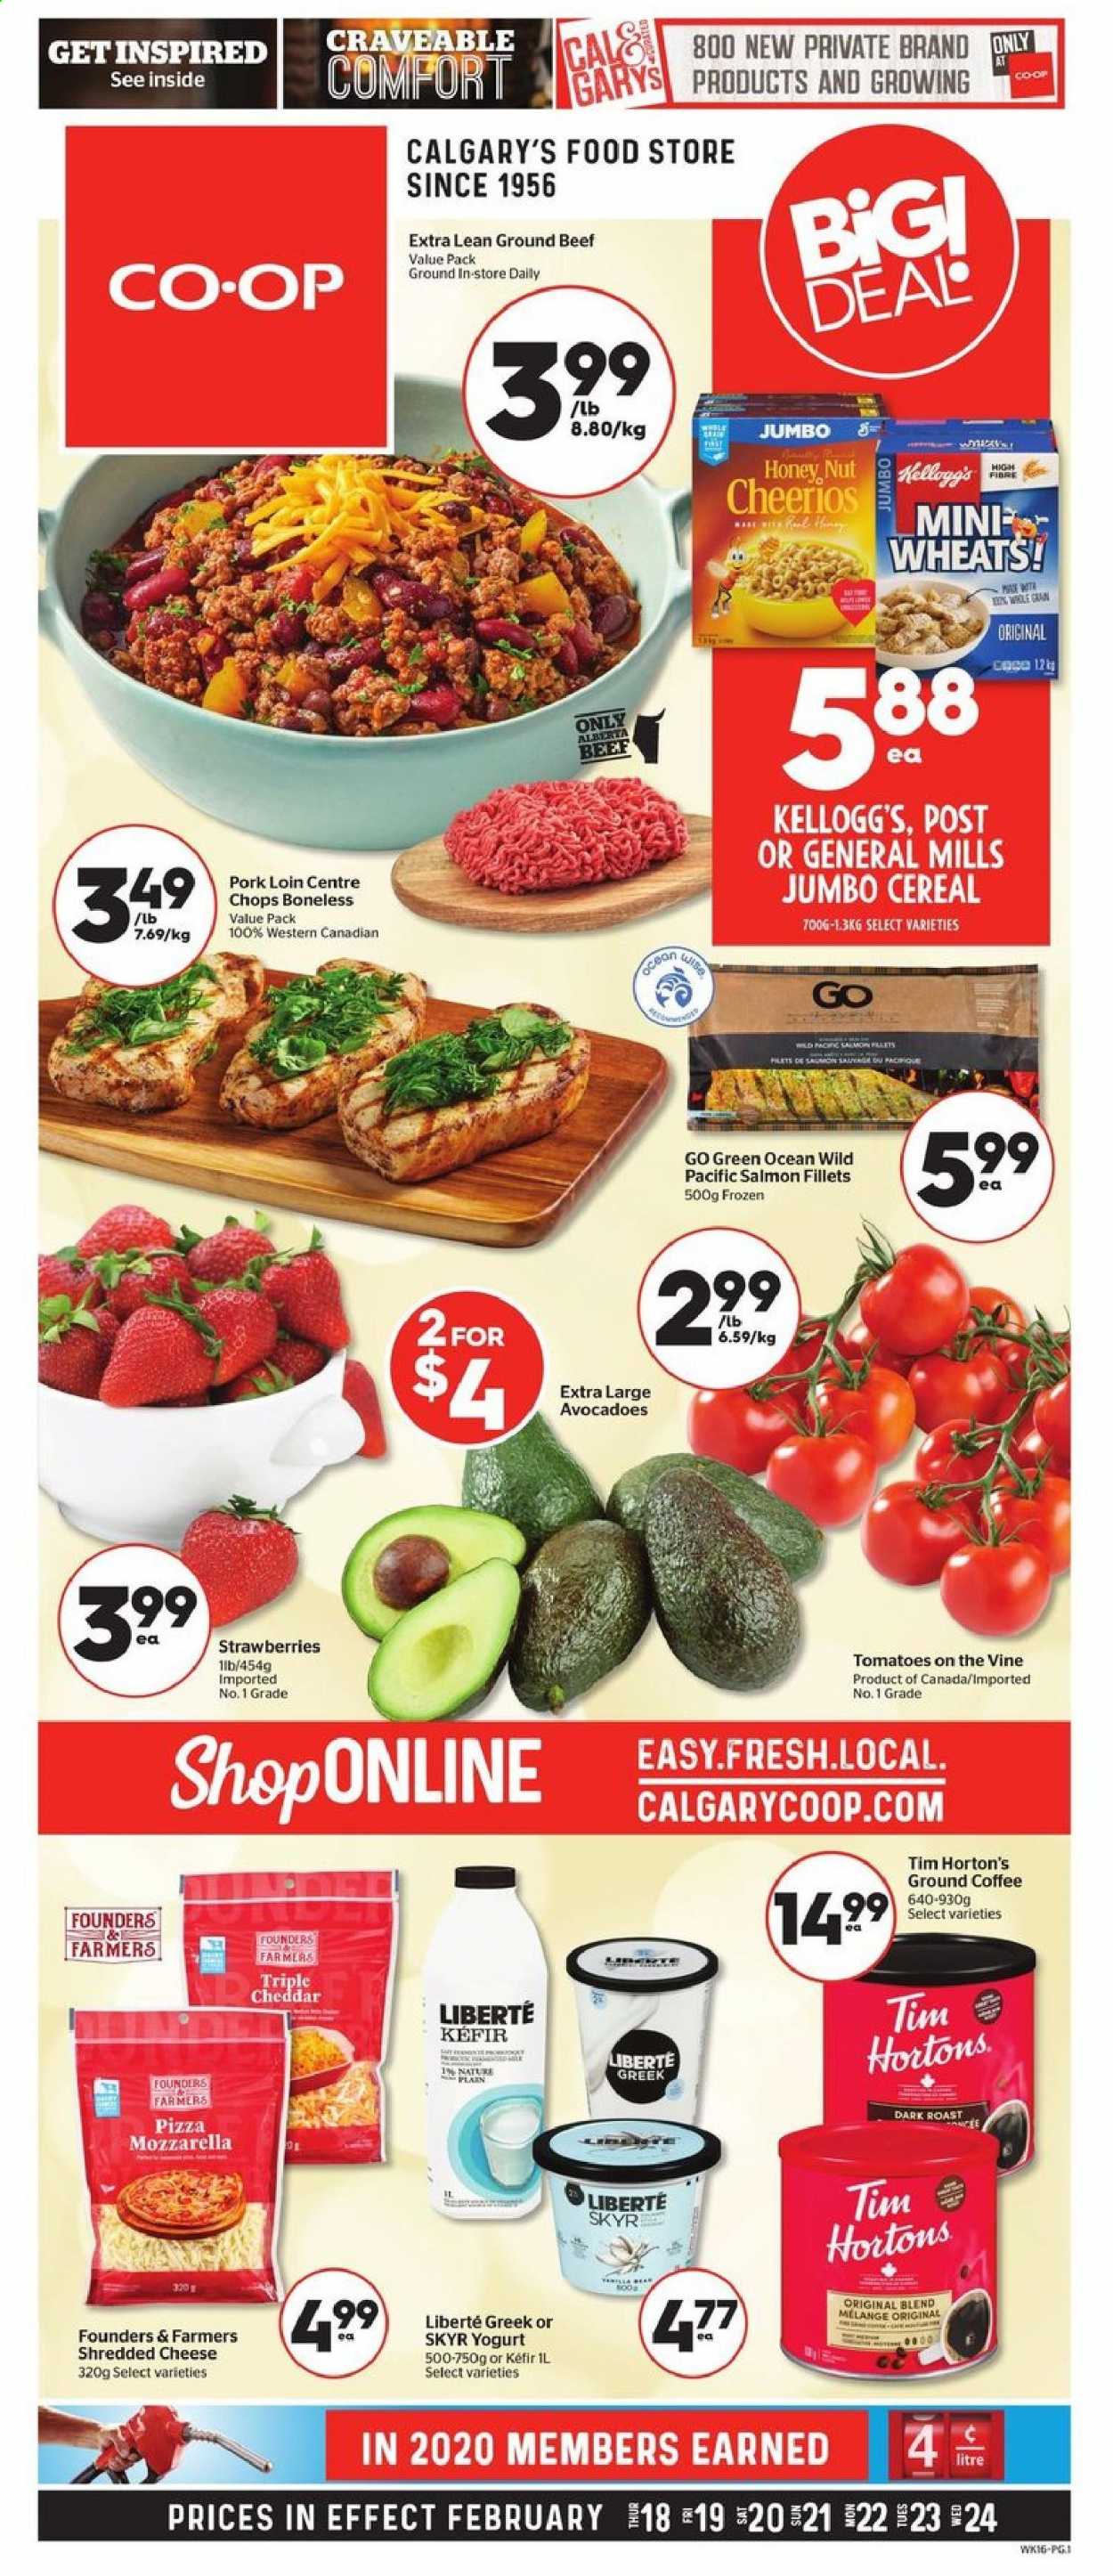 thumbnail - Calgary Co-op Flyer - February 18, 2021 - February 24, 2021 - Sales products - salmon, salmon fillet, pizza, shredded cheese, cheddar, yoghurt, kefir, Kellogg's, cereals, Cheerios, coffee, ground coffee, beef meat, ground beef, pork loin, pork meat. Page 1.